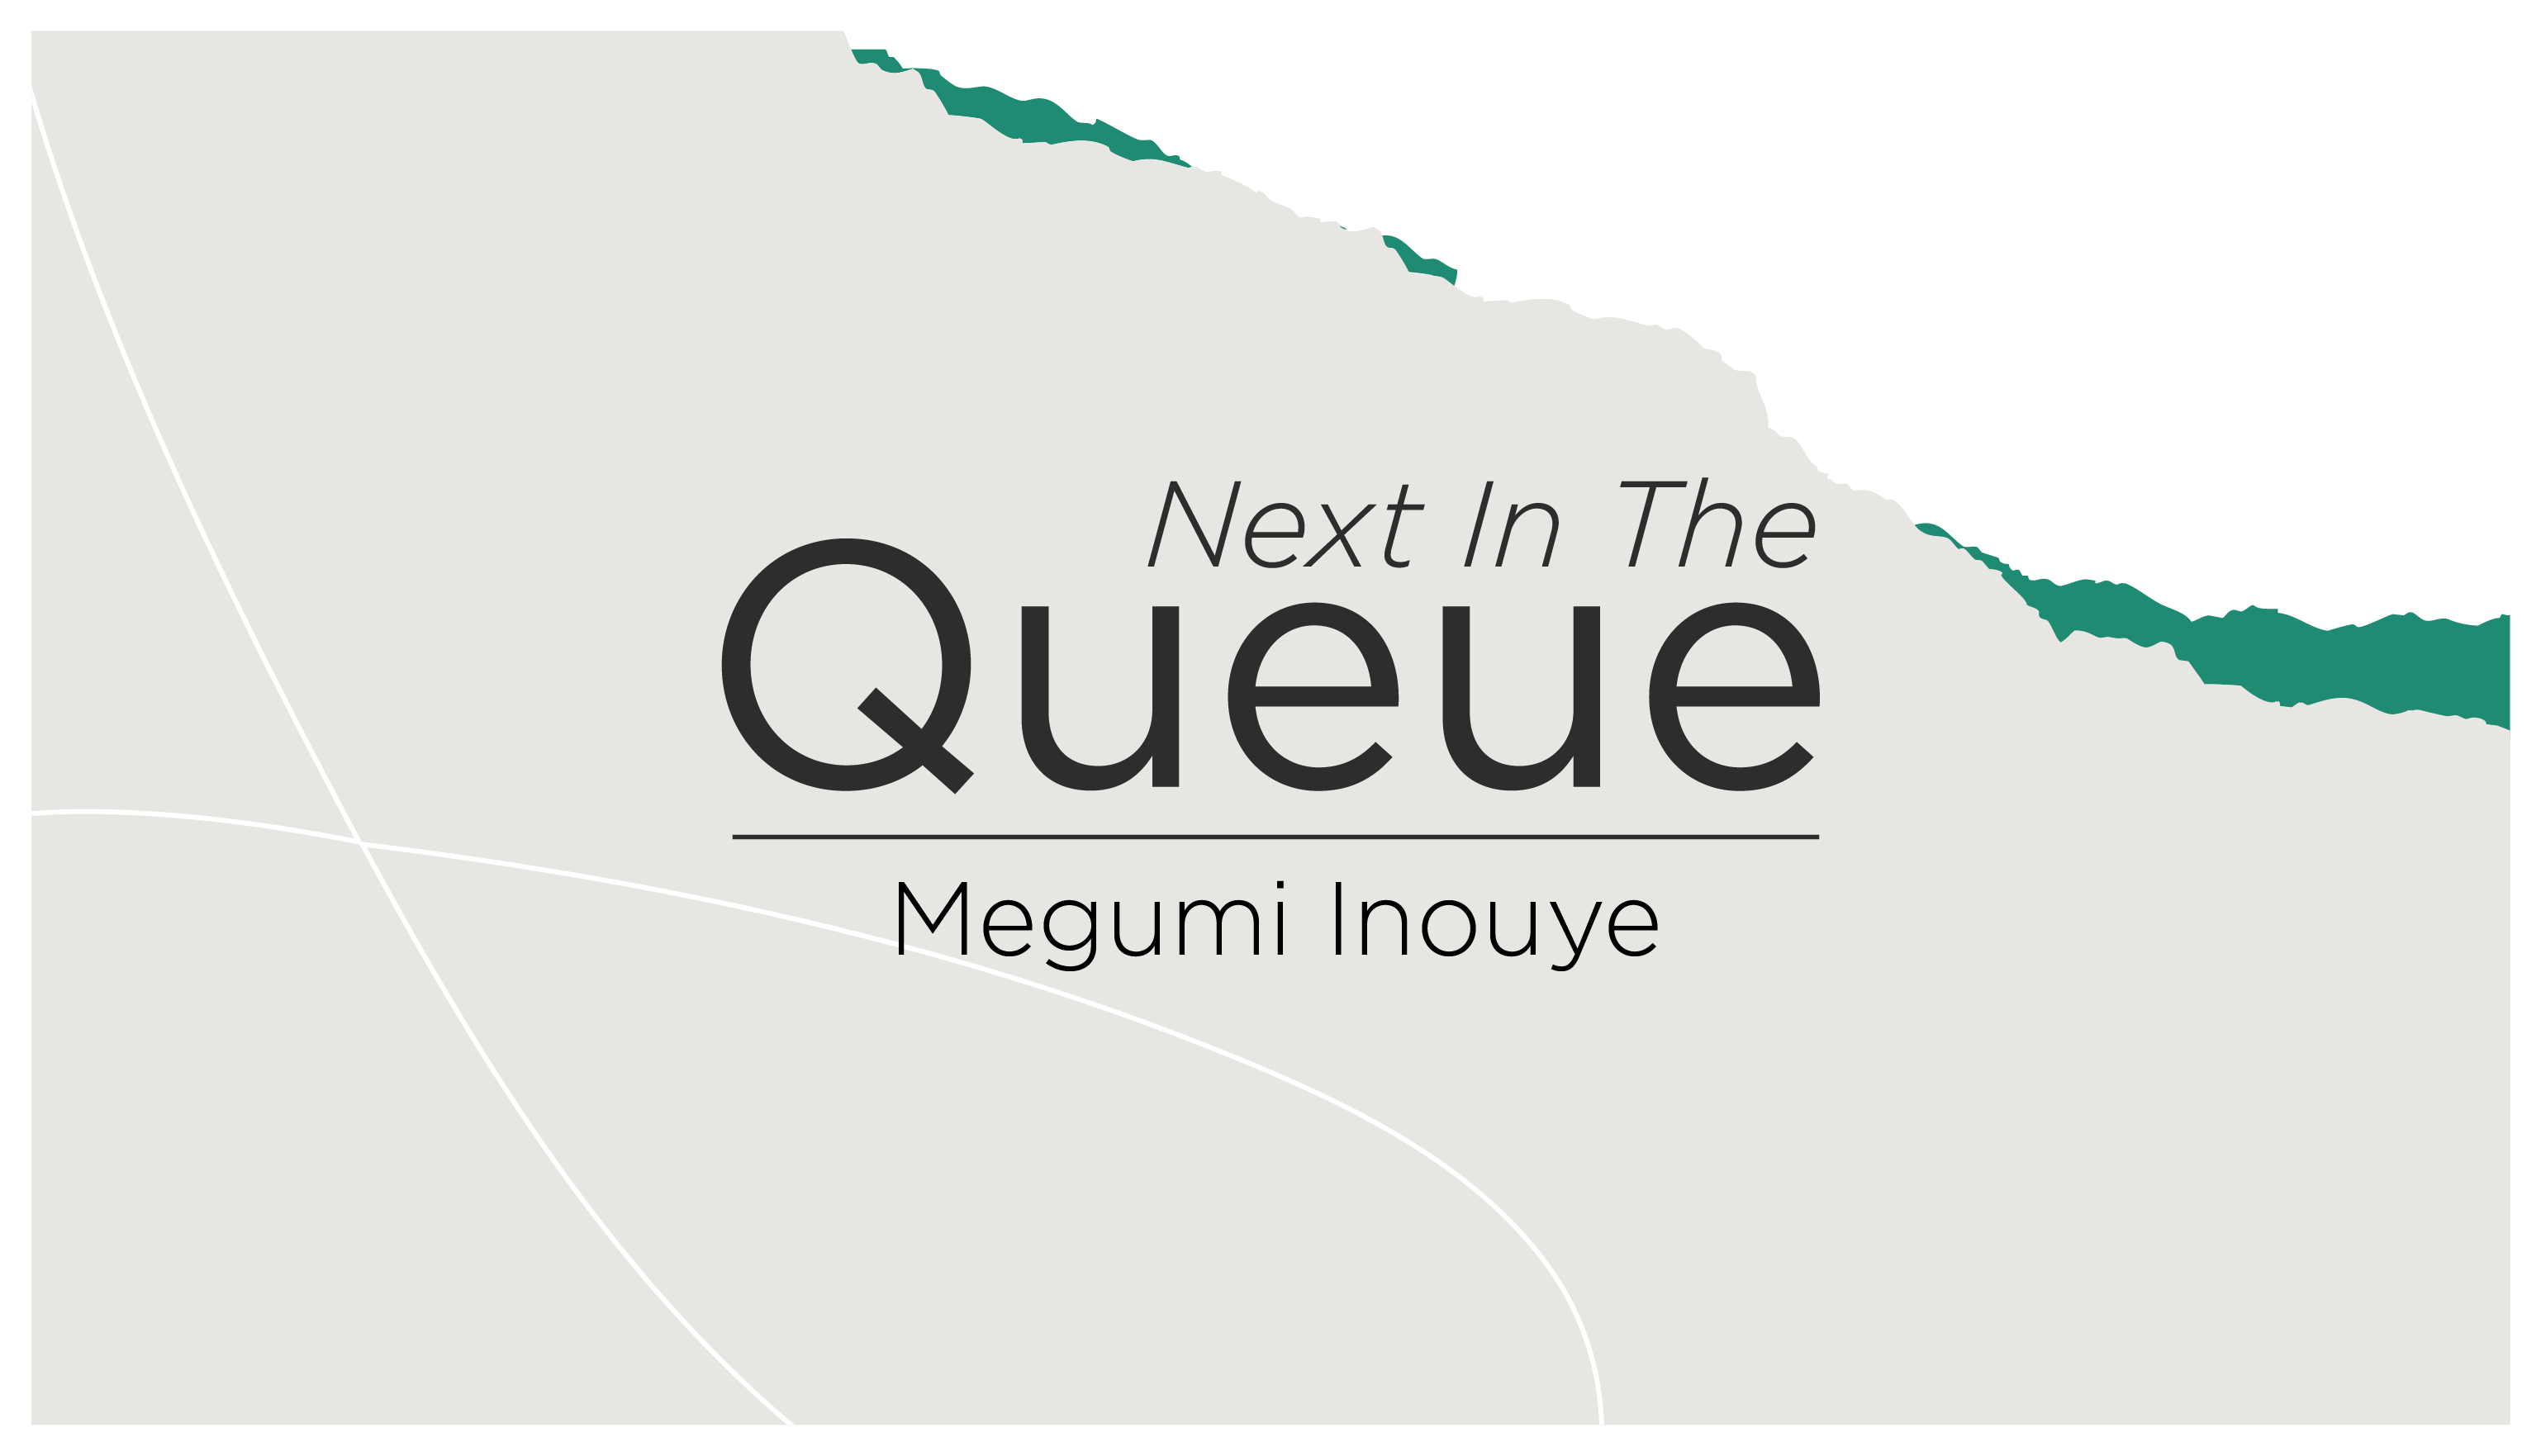 blog post cover graphic for The Queue featuring Megumi Inouye